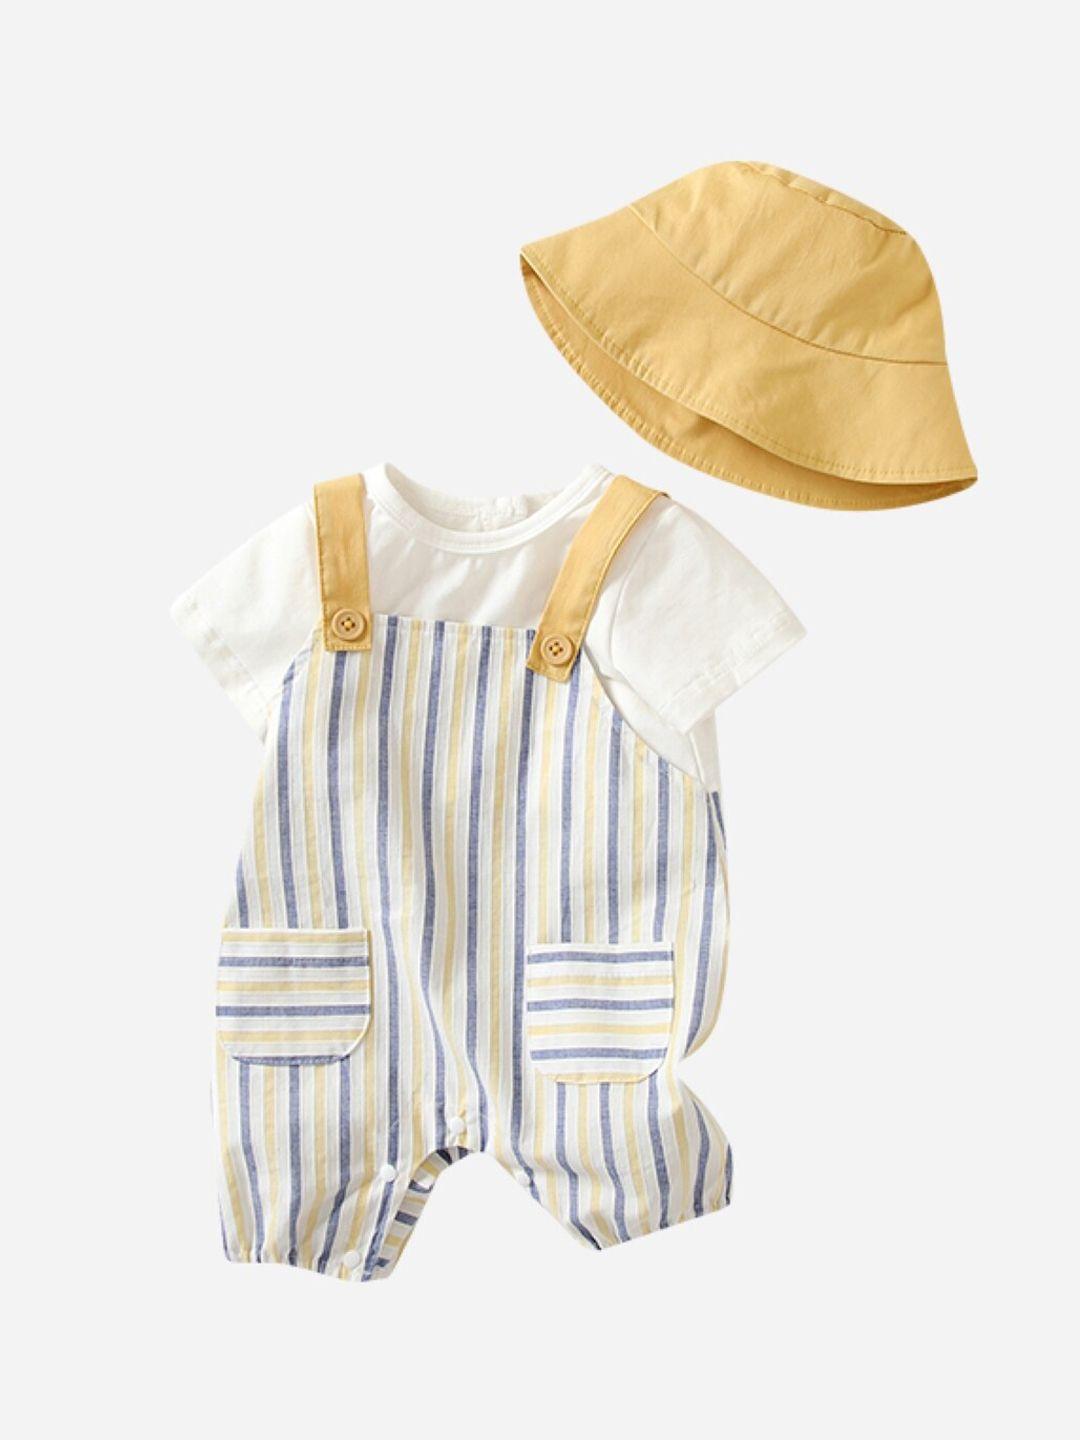 stylecast infants yellow & white striped pure cotton romper